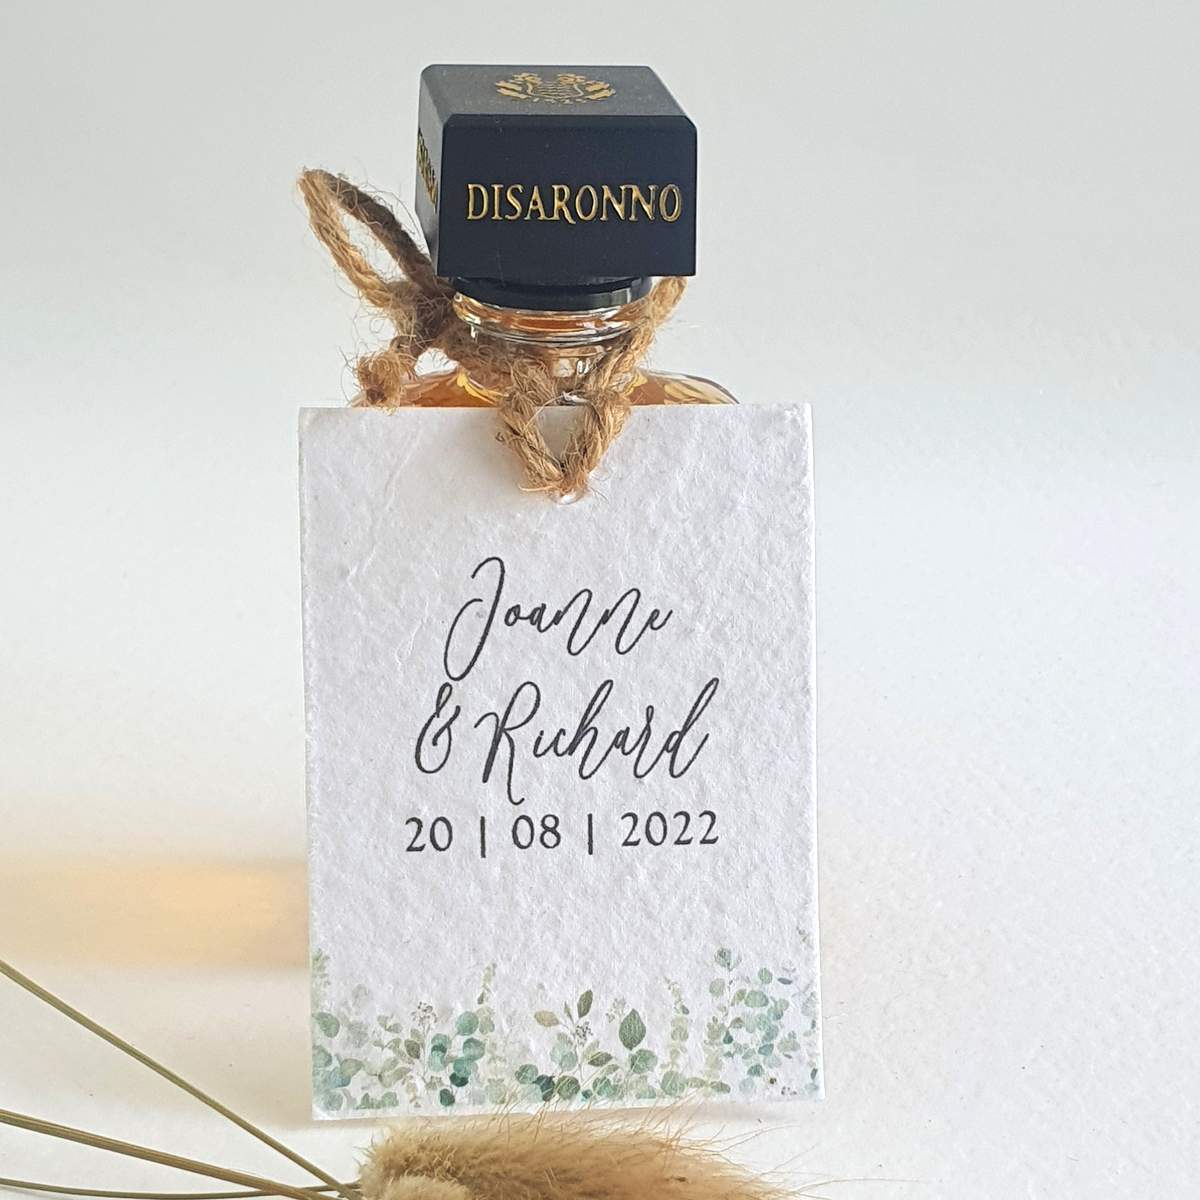 a miniature alcohol bottle wedding favour with a tag made from plantable seed paper